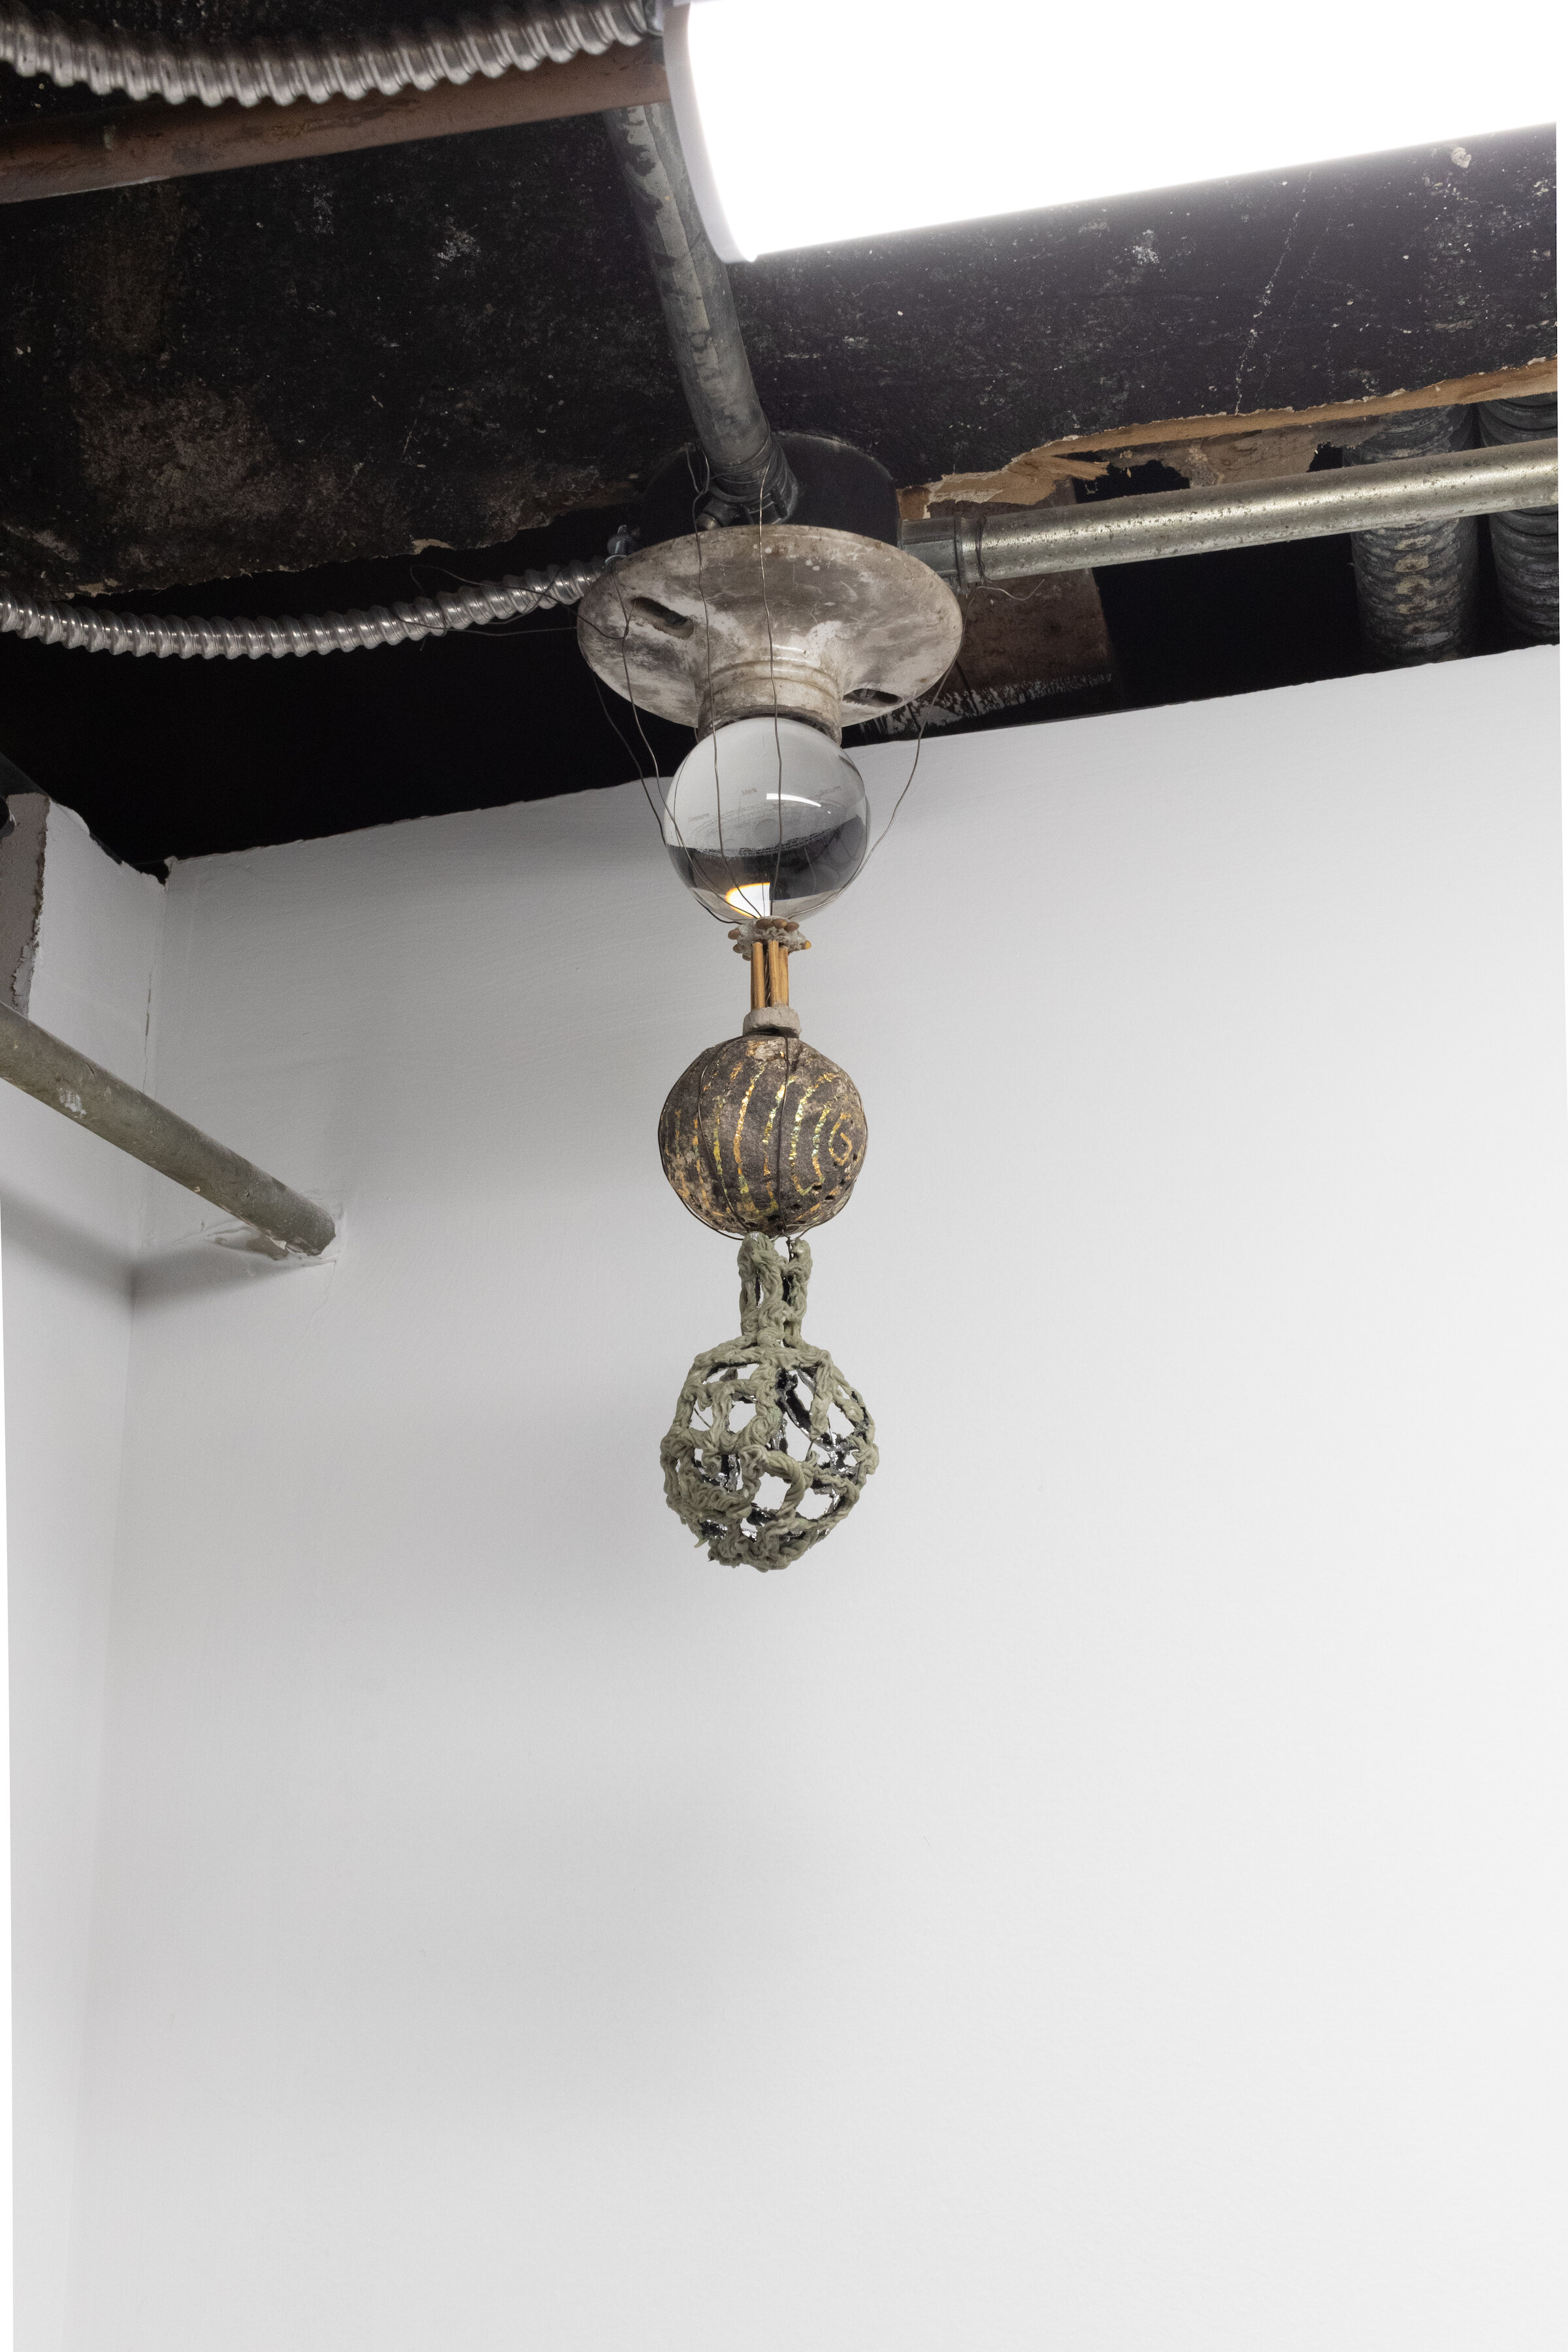   Two Orbs , glass ball with laser-engraved solar system, skewers, card and toilet paper pulp, epoxy clay, lentils, paper pulp, wire, acrylics, metal leaf.  